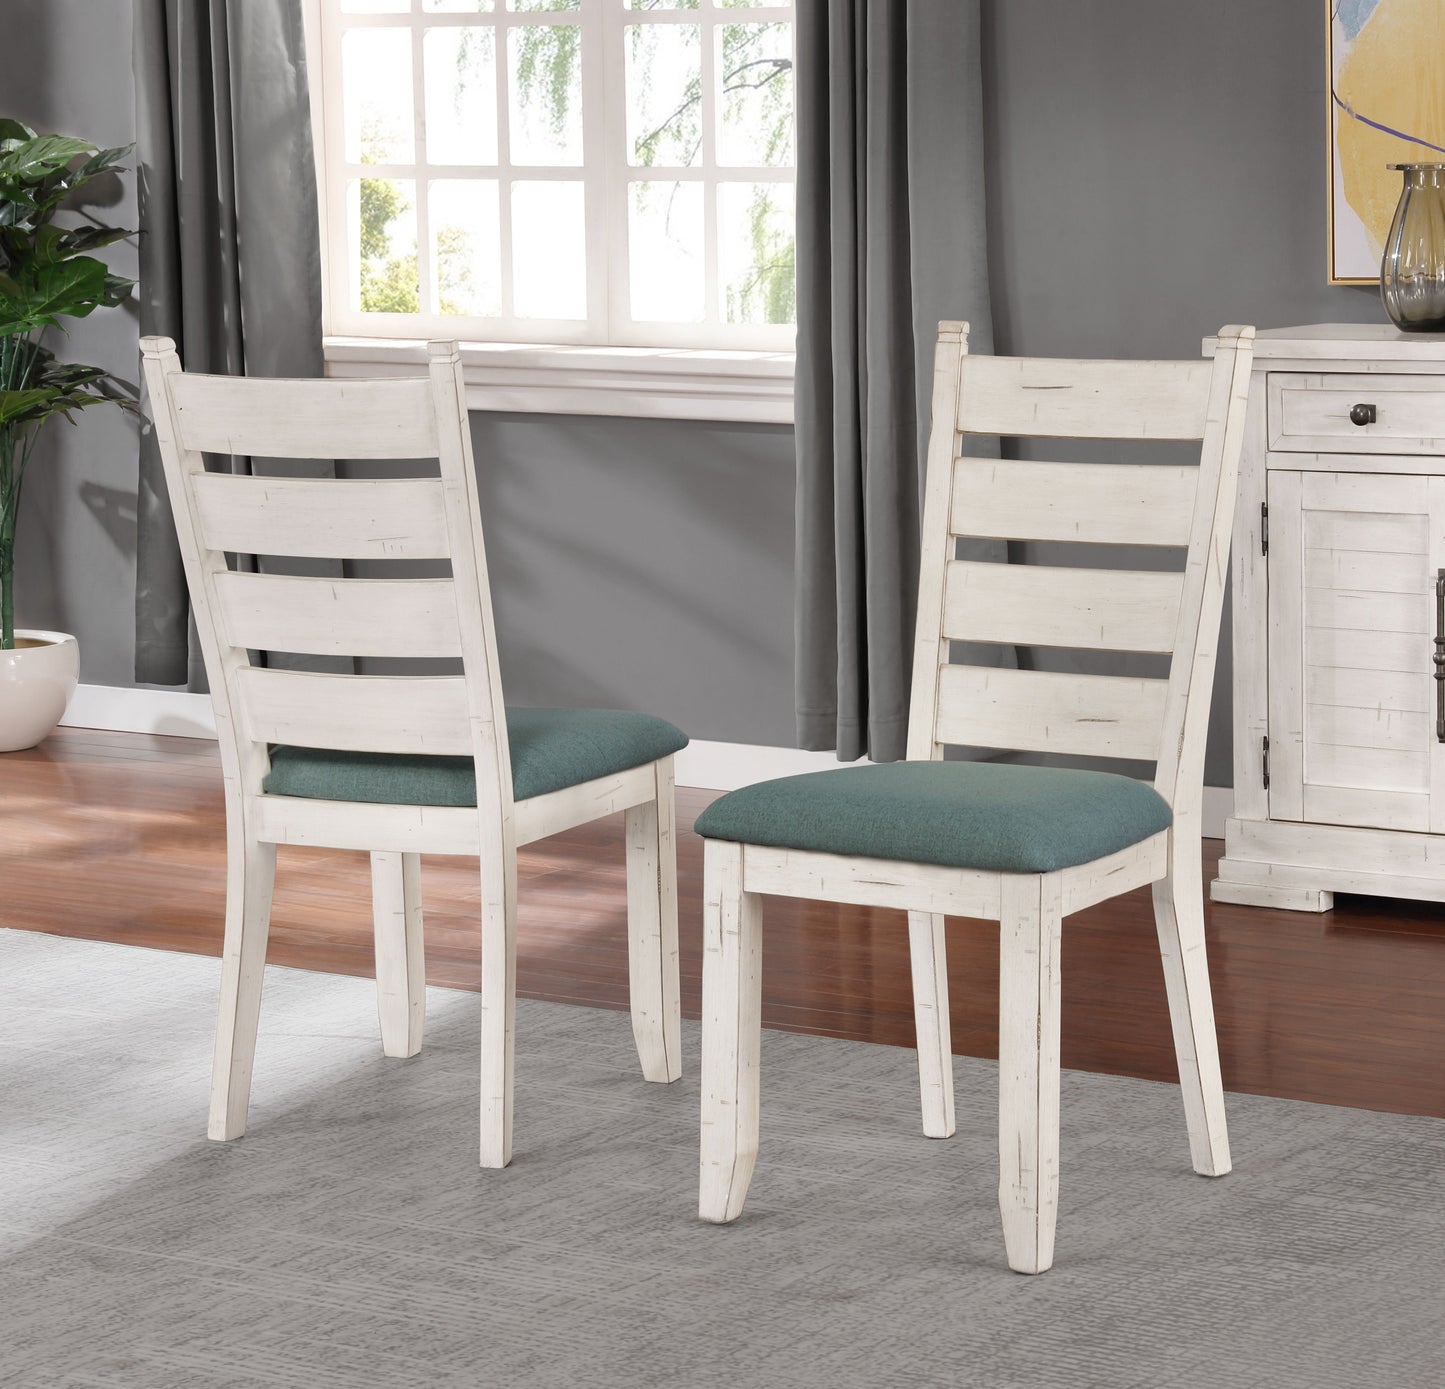 Florina Antique White Wood Ladderback Upholstered Dining Chairs, Set of 2